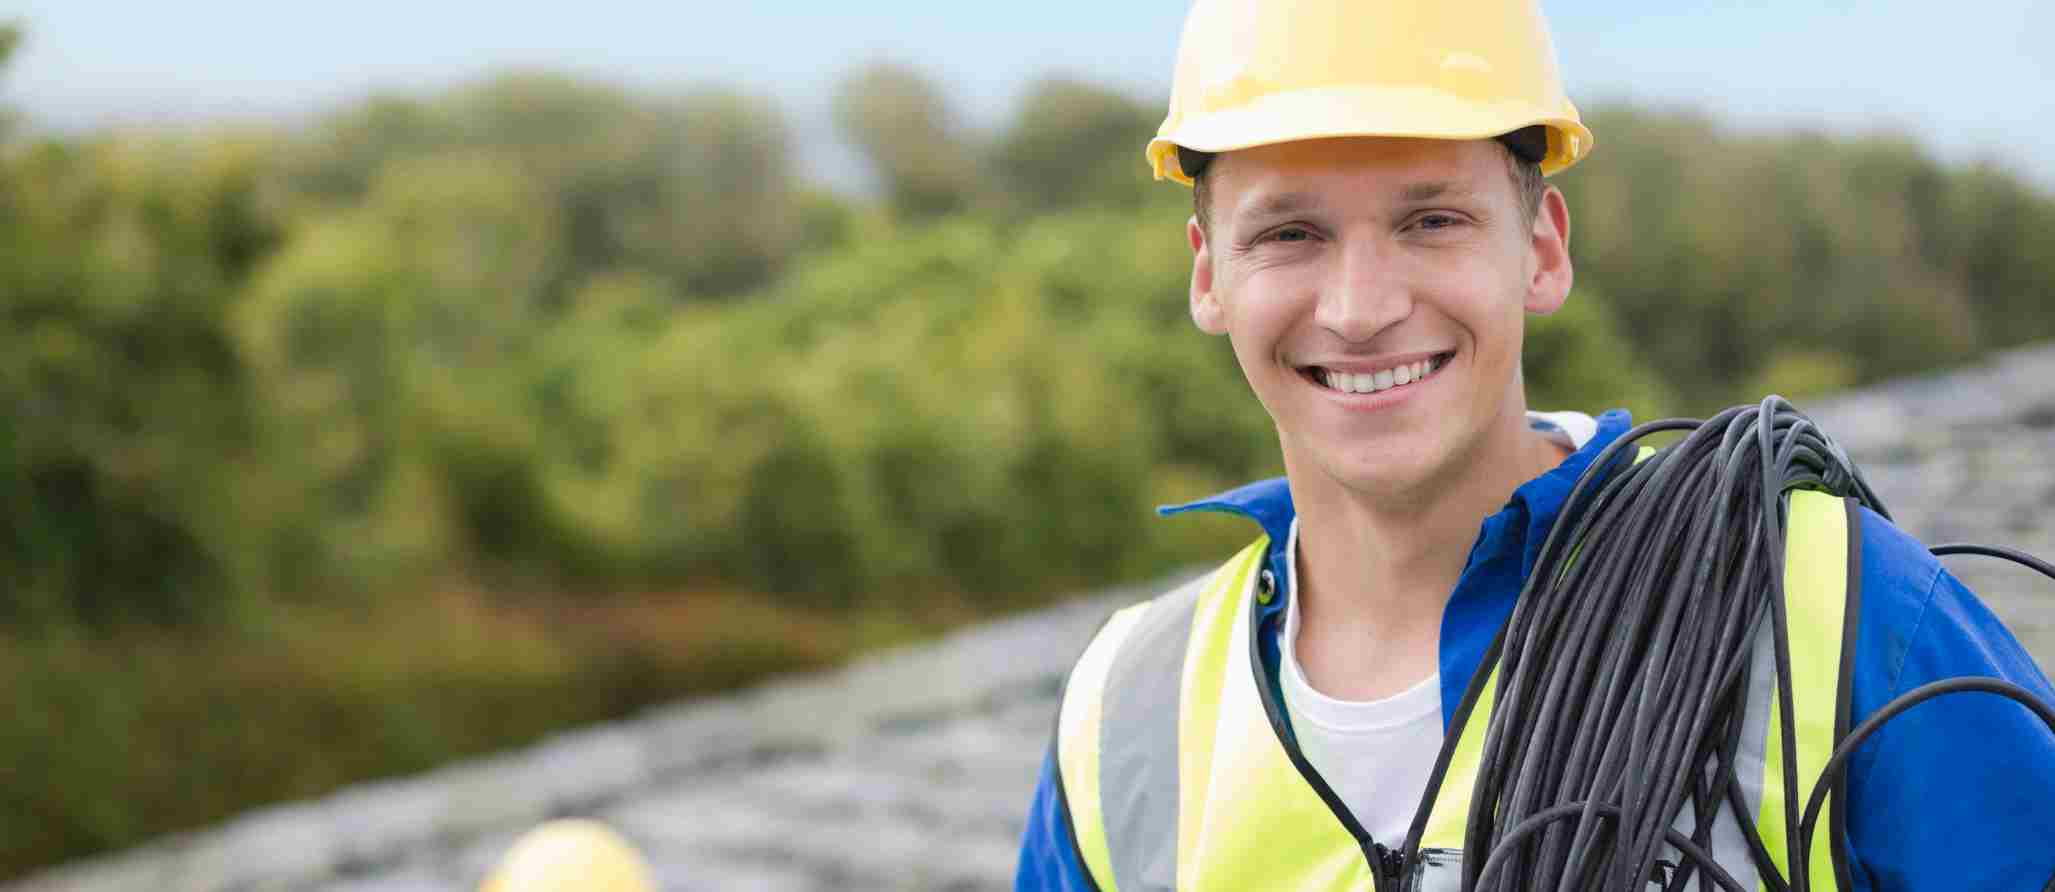 The importance of supervising apprentices